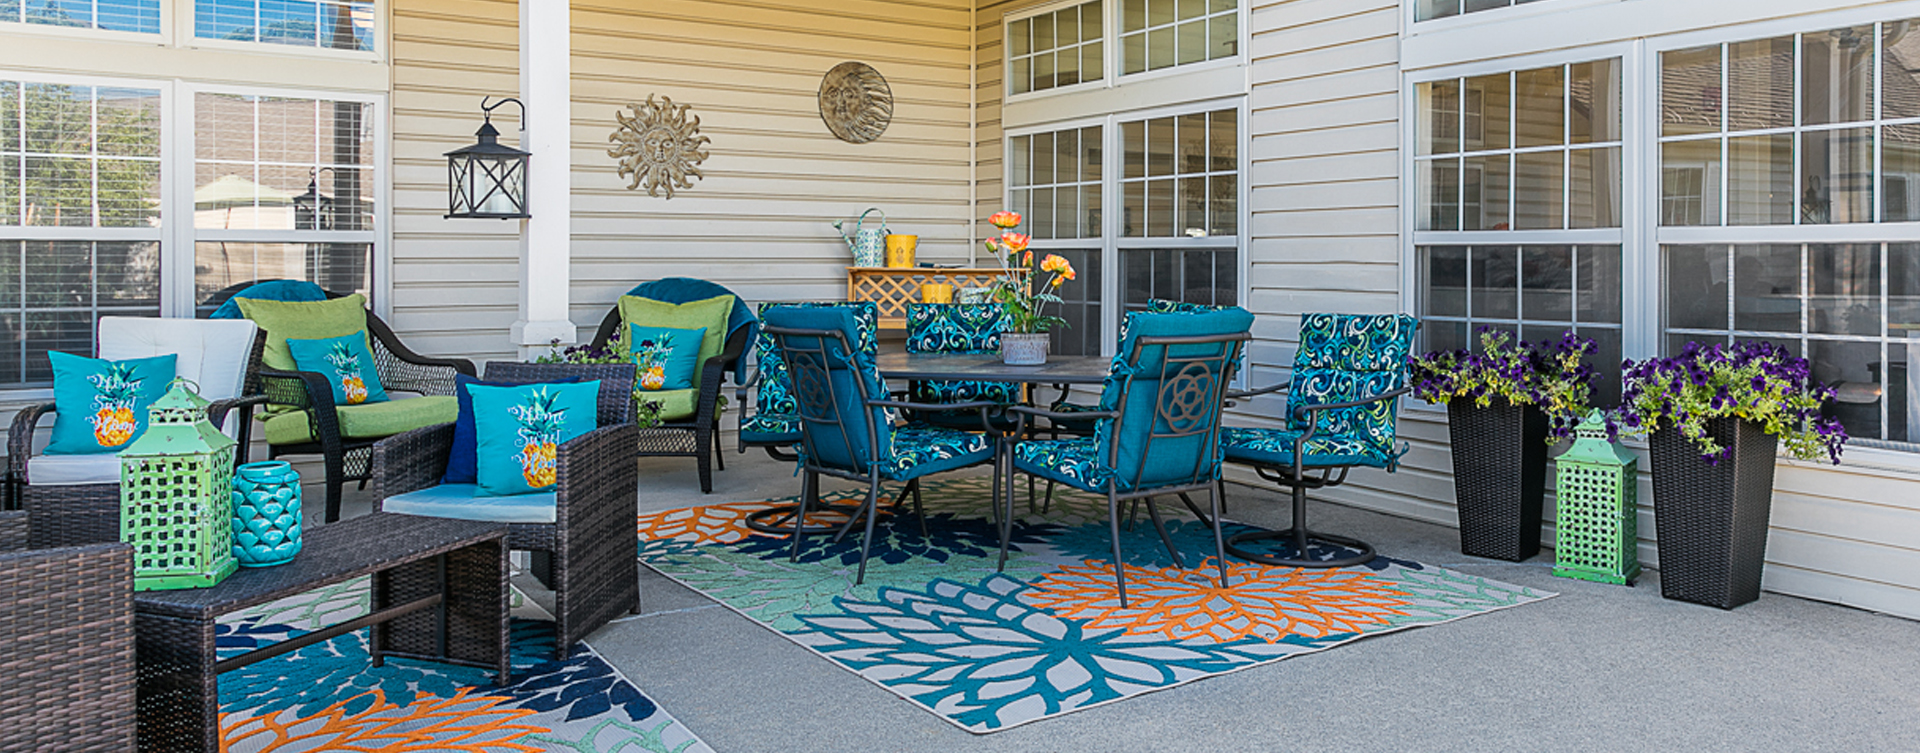 Enjoy the outdoors in a whole new light by stepping into our secure courtyard at Bickford of Marshalltown